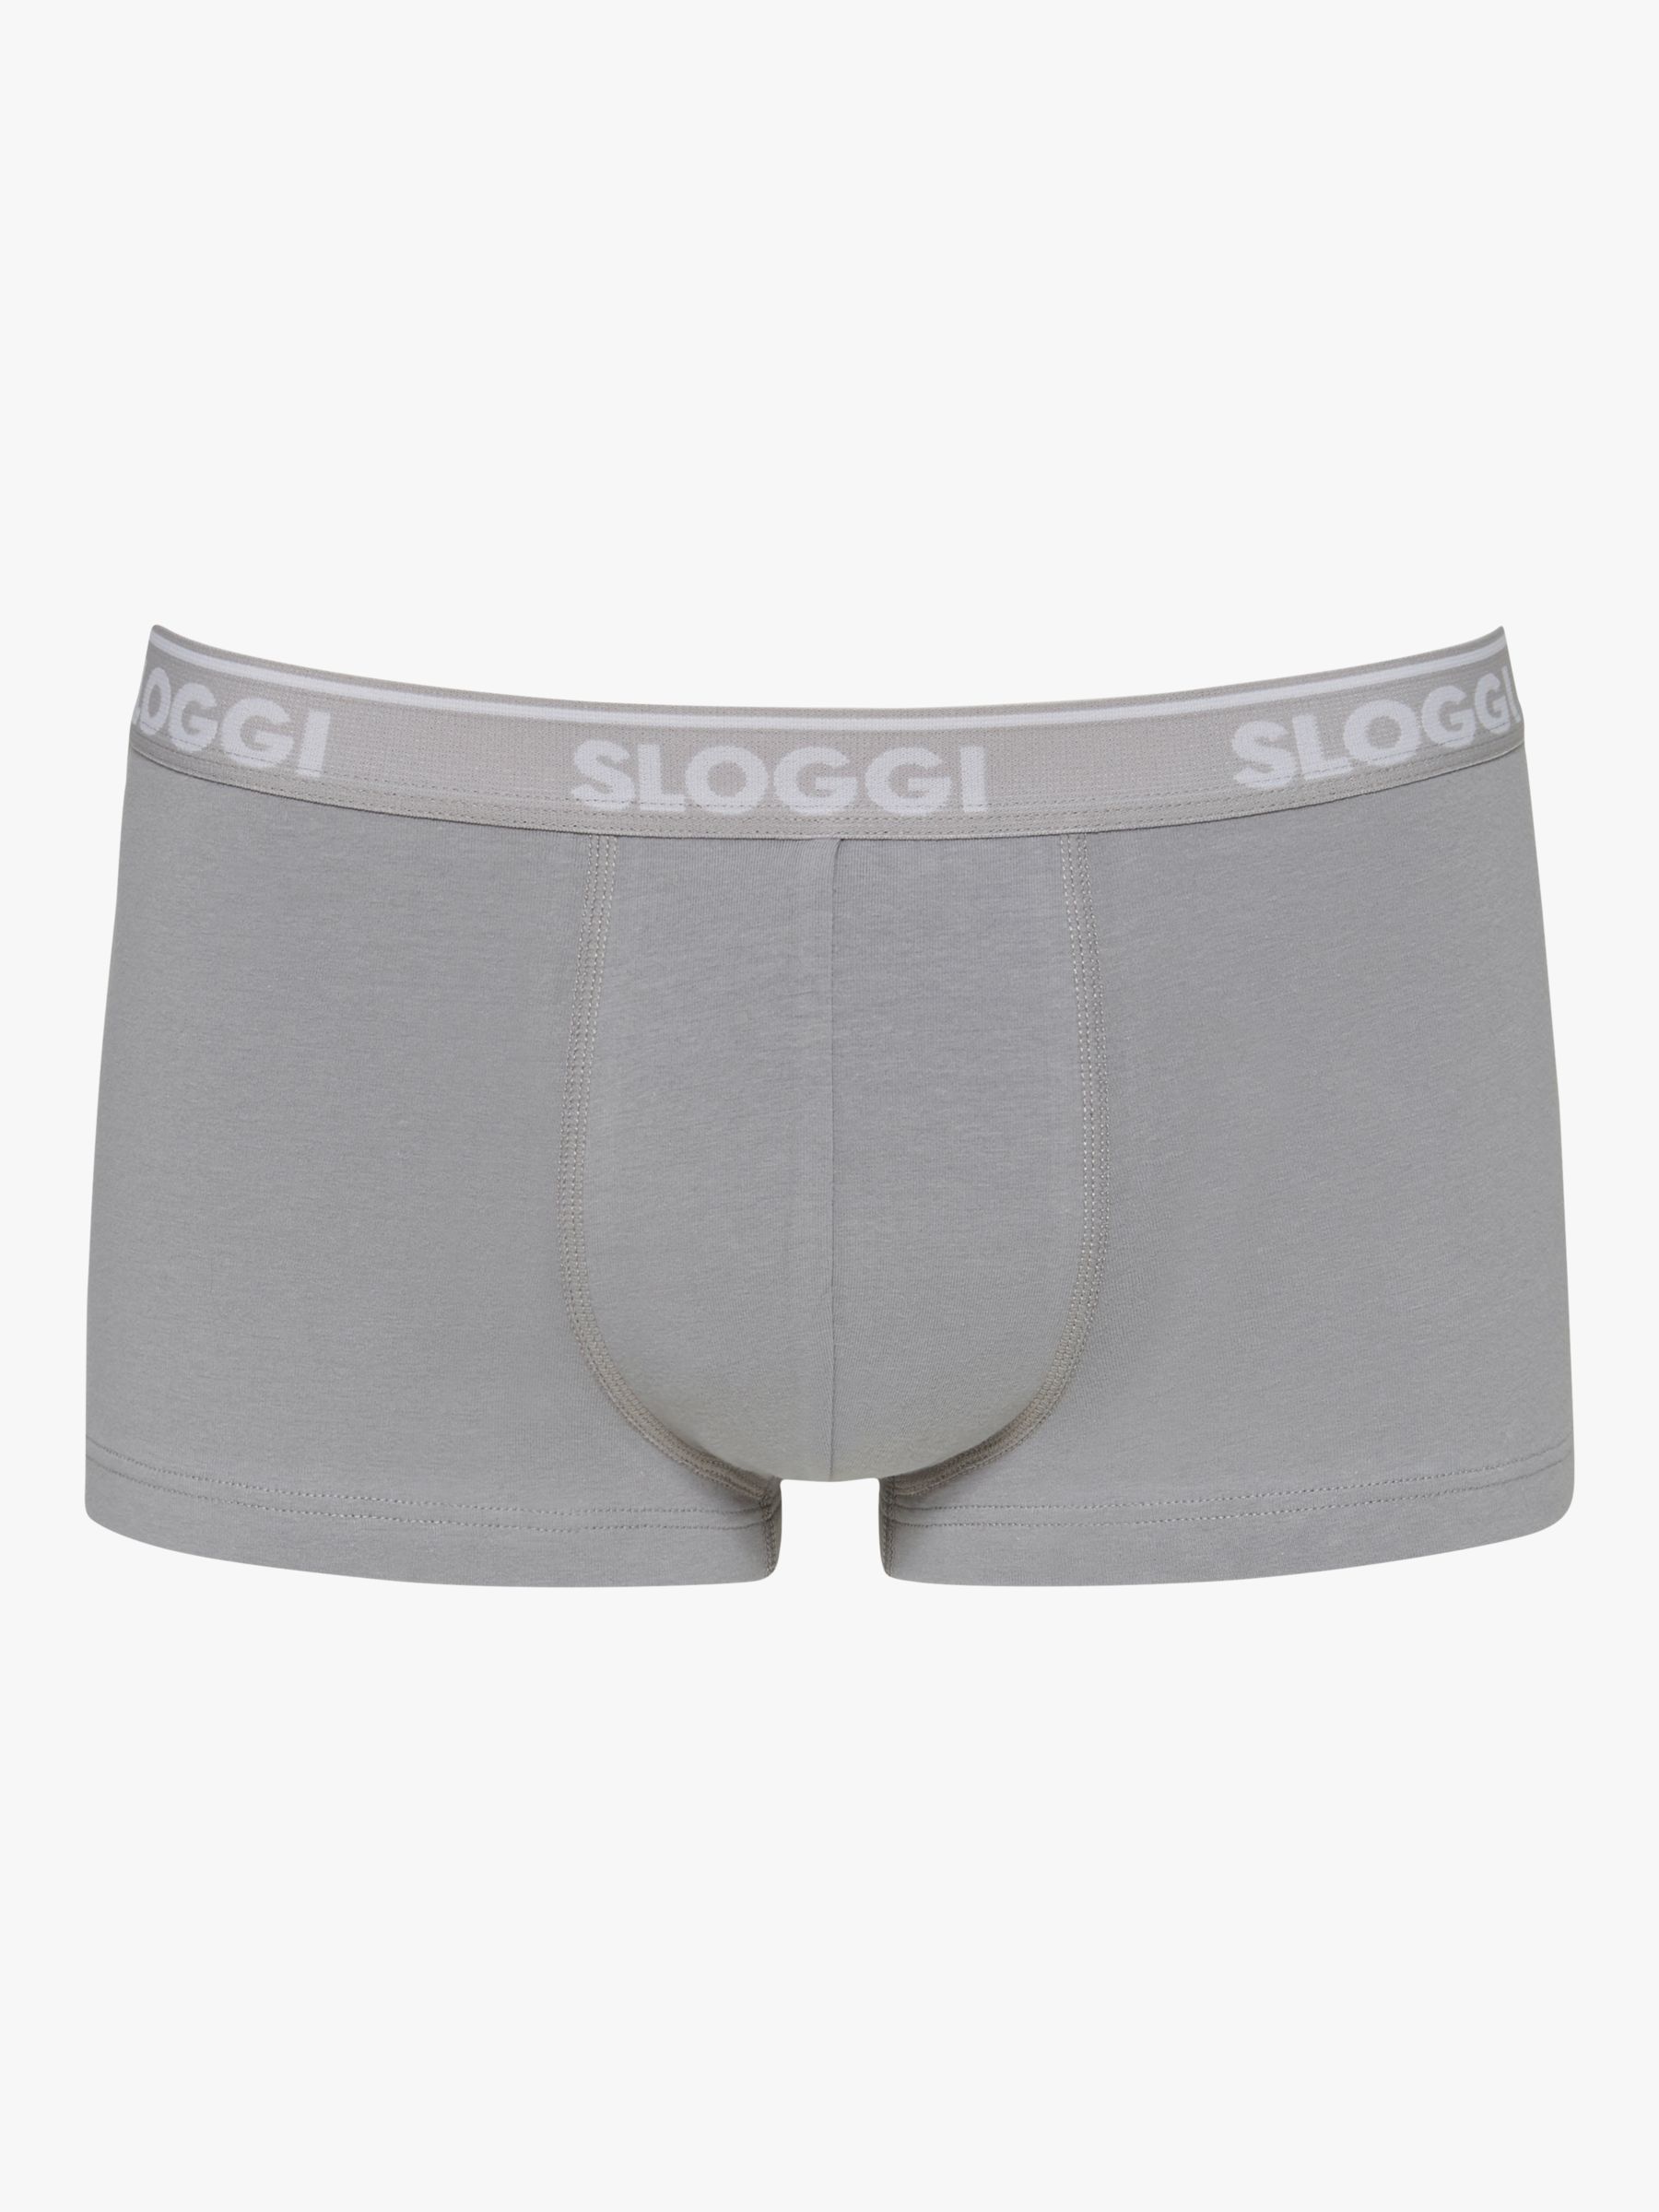 Buy sloggi GO ABC Cotton Stretch Hipster Trunks, Pack of 6 Online at johnlewis.com